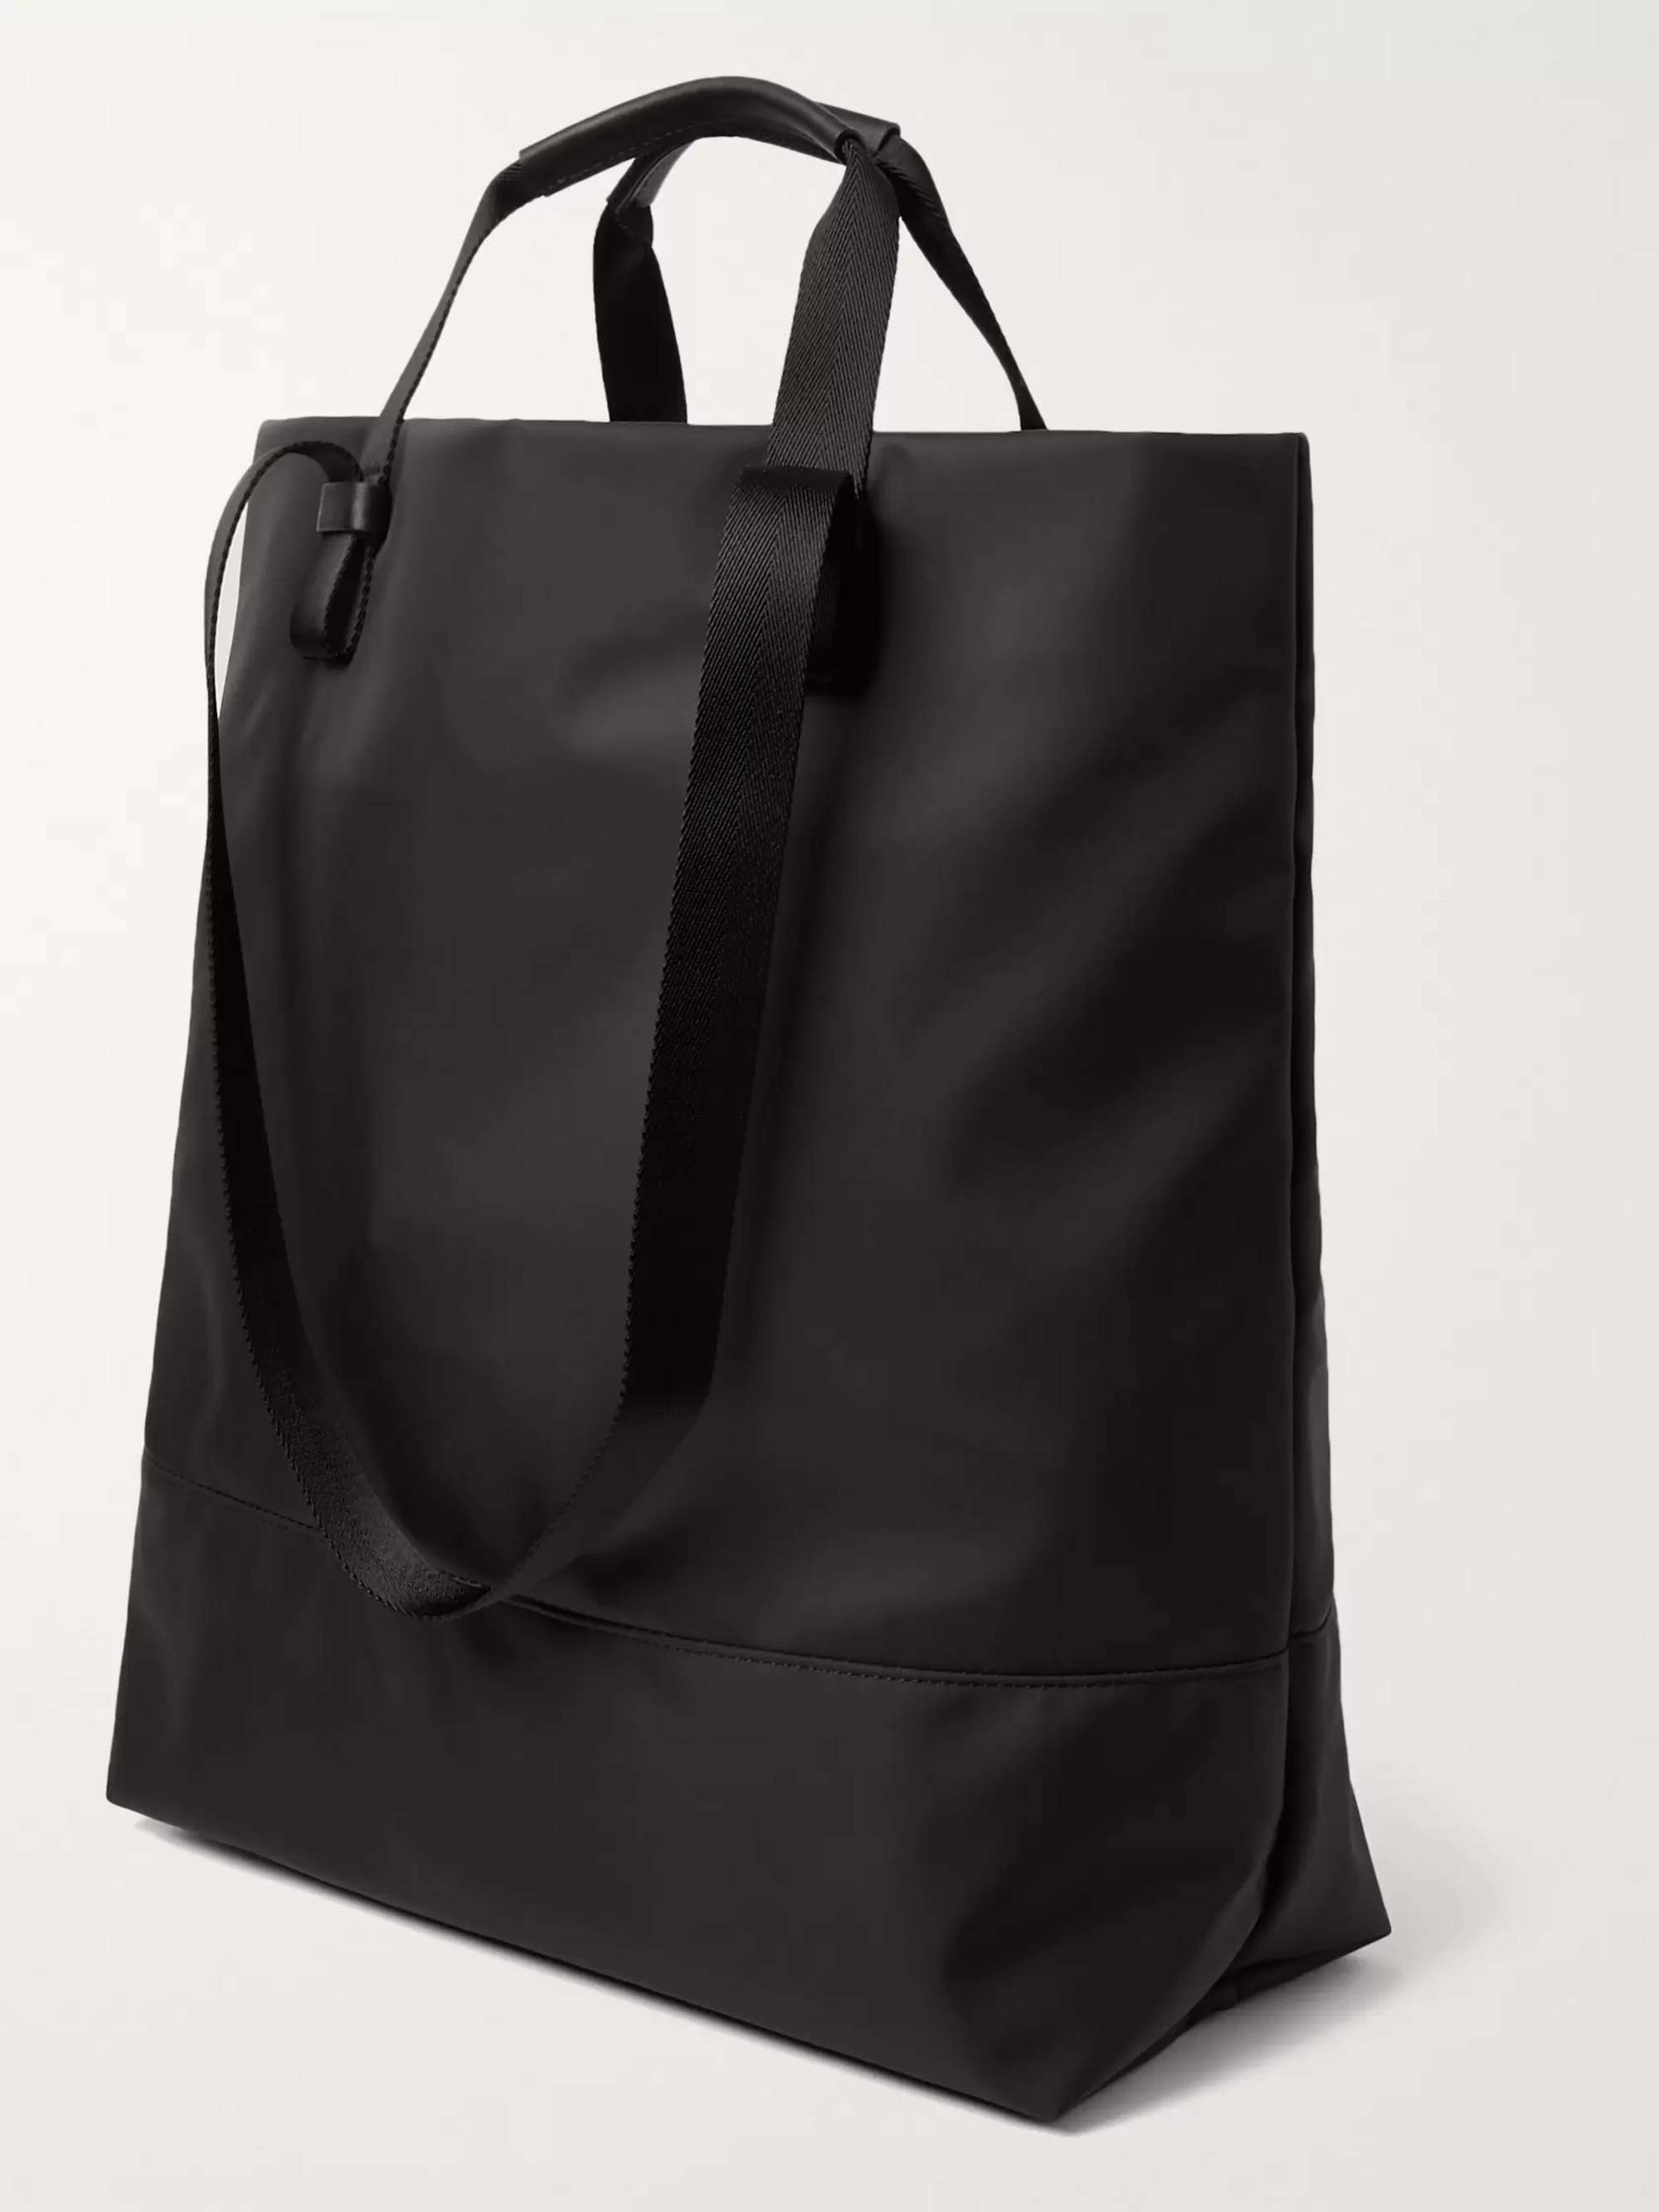 WANT LES ESSENTIELS Dayton Leather-Trimmed Nylon Tote Bag